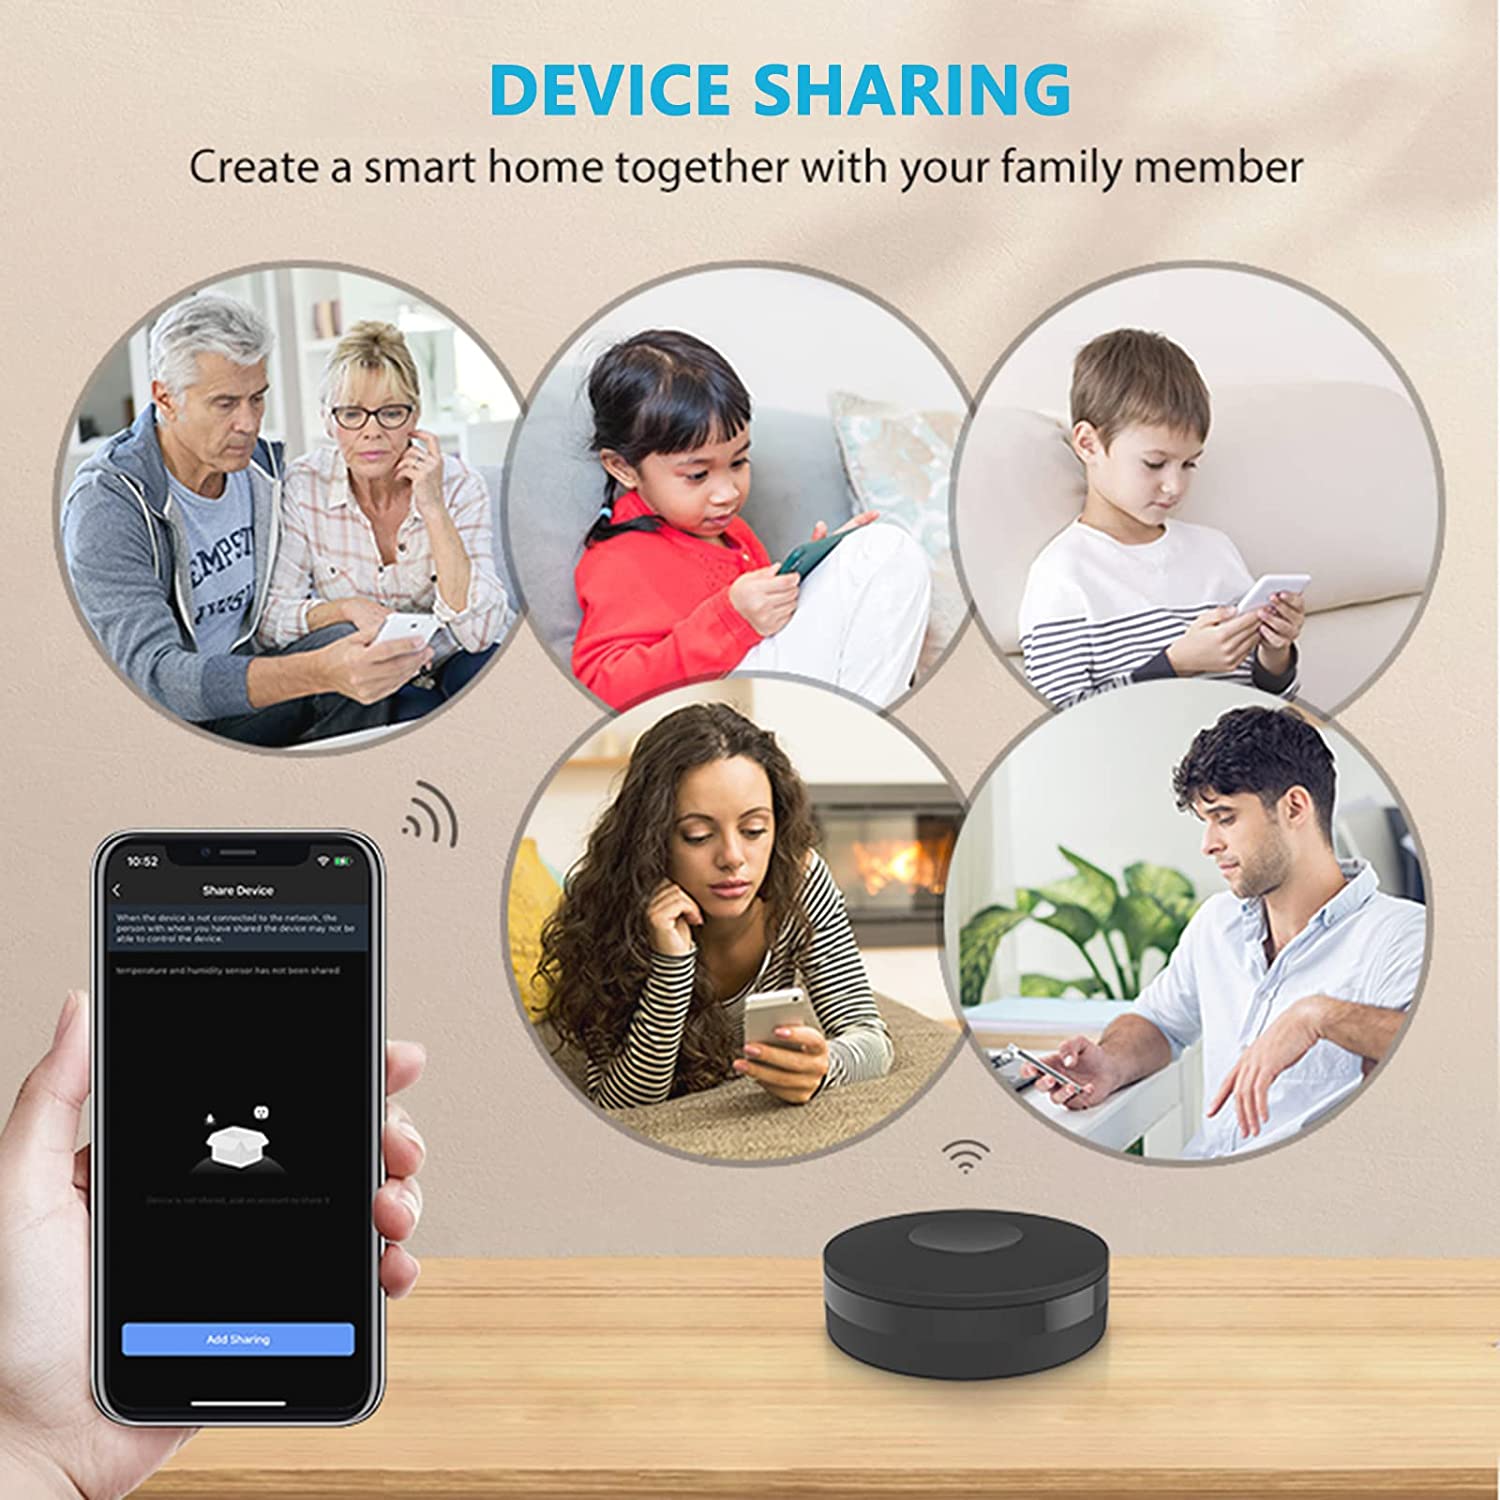 Smart IR Remote Control, 2.4G WiFi Universal Smart Home Hub, WiFi Smart Controller for Home Automation,Air Conditioner, TV, Ceiling Fan, Curtain Remote, Compatible with Alexa, Google Assistant